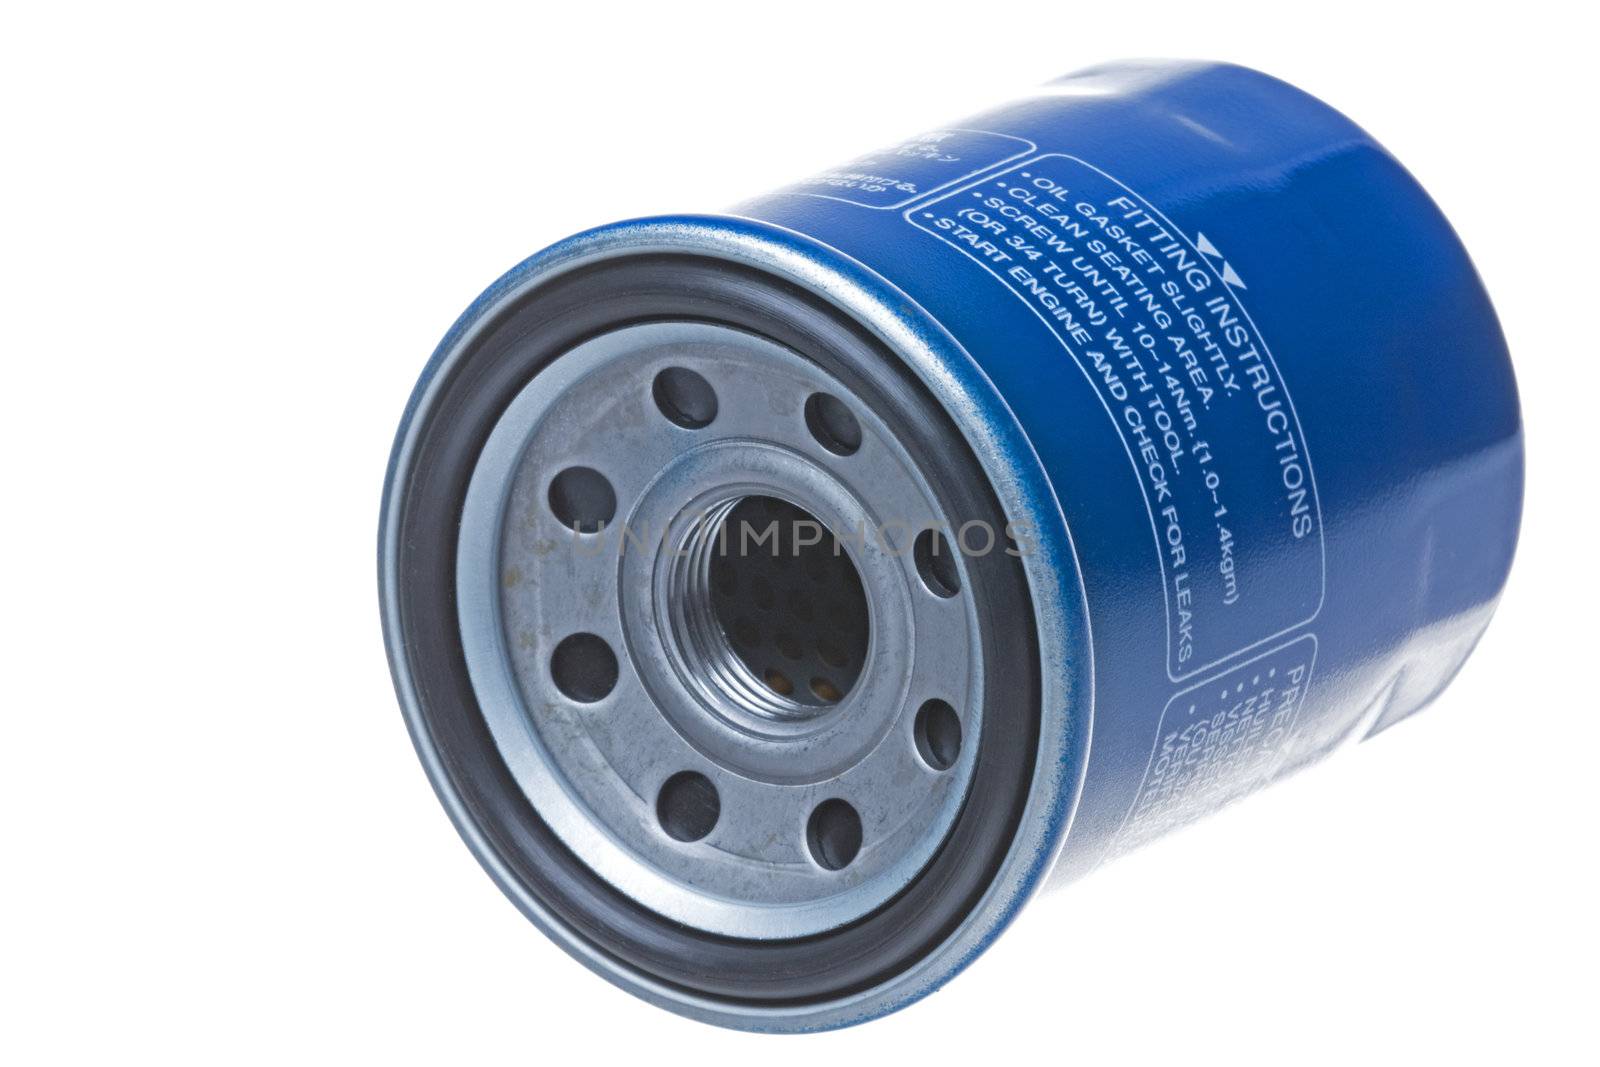 Isolated image of an engine oil filter.